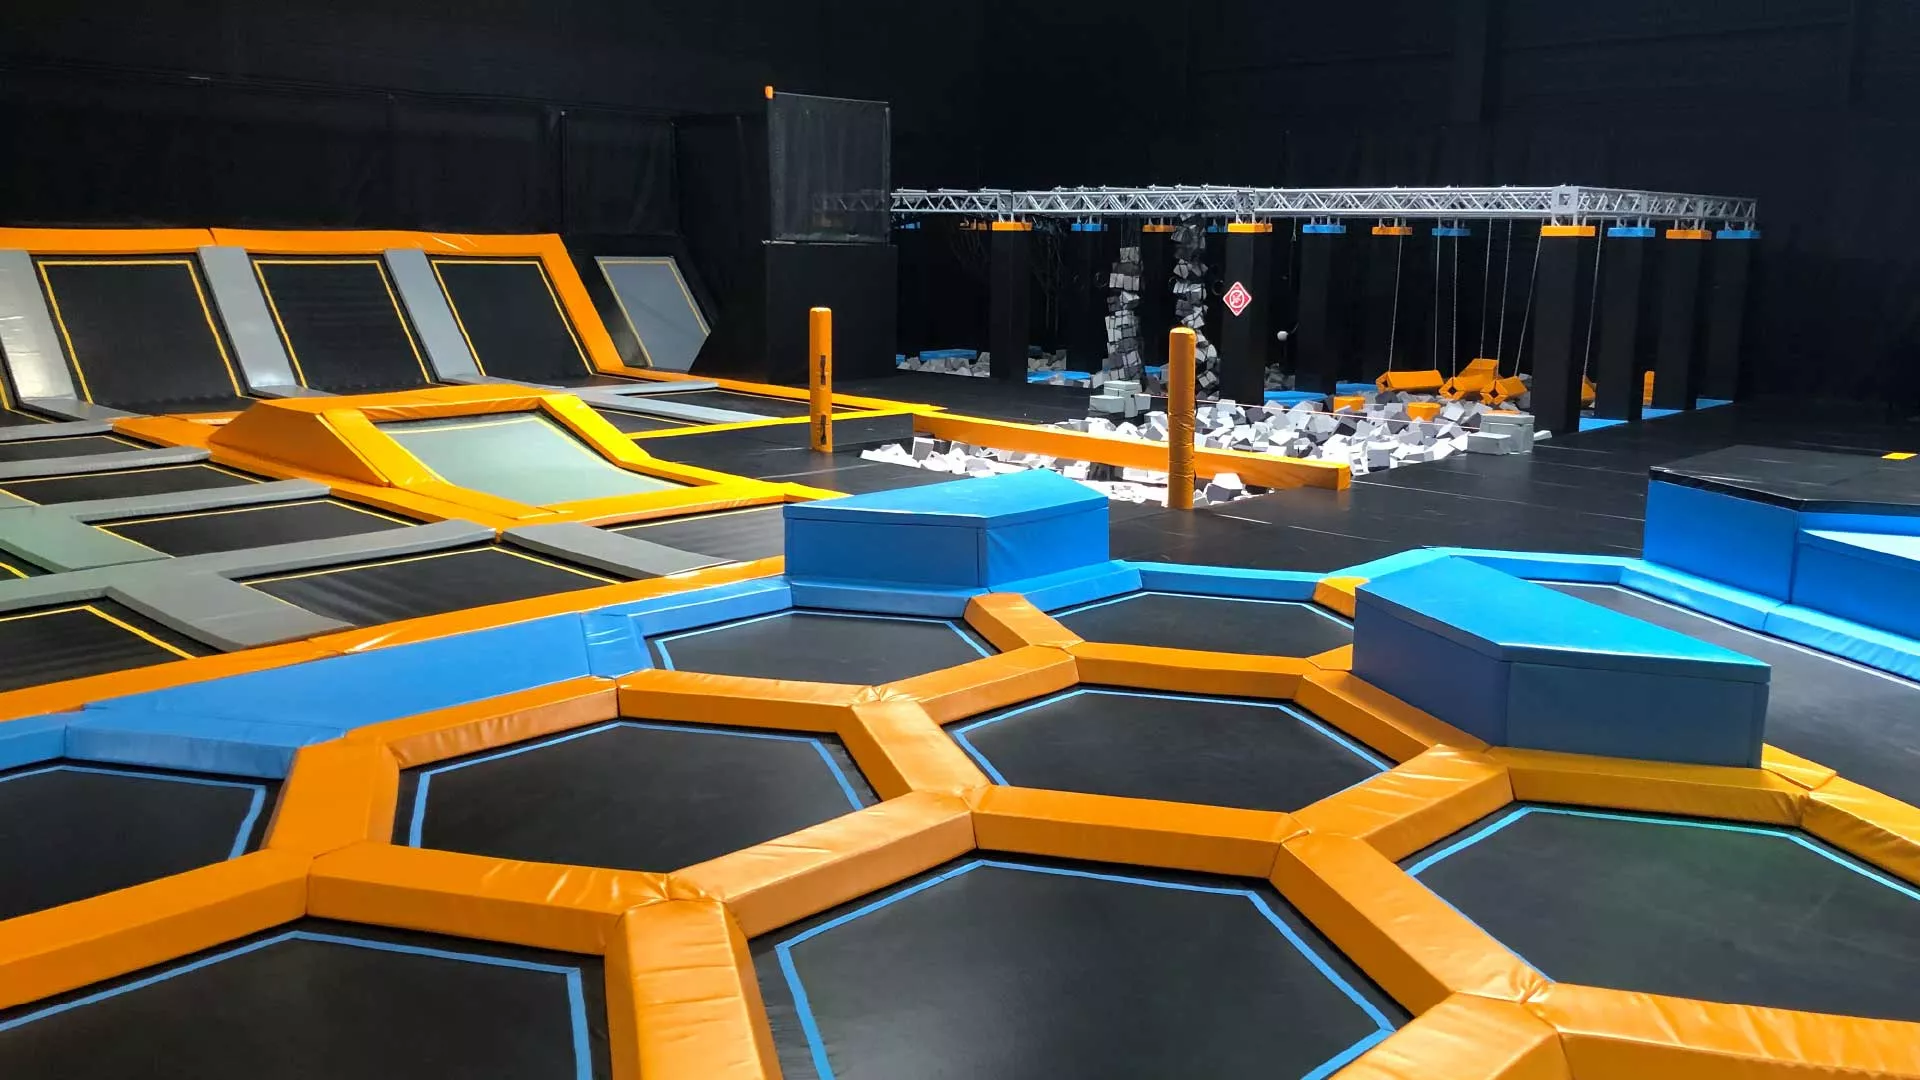 Trampoline Park Urban Jump in France, Europe | Trampolining - Rated 3.9